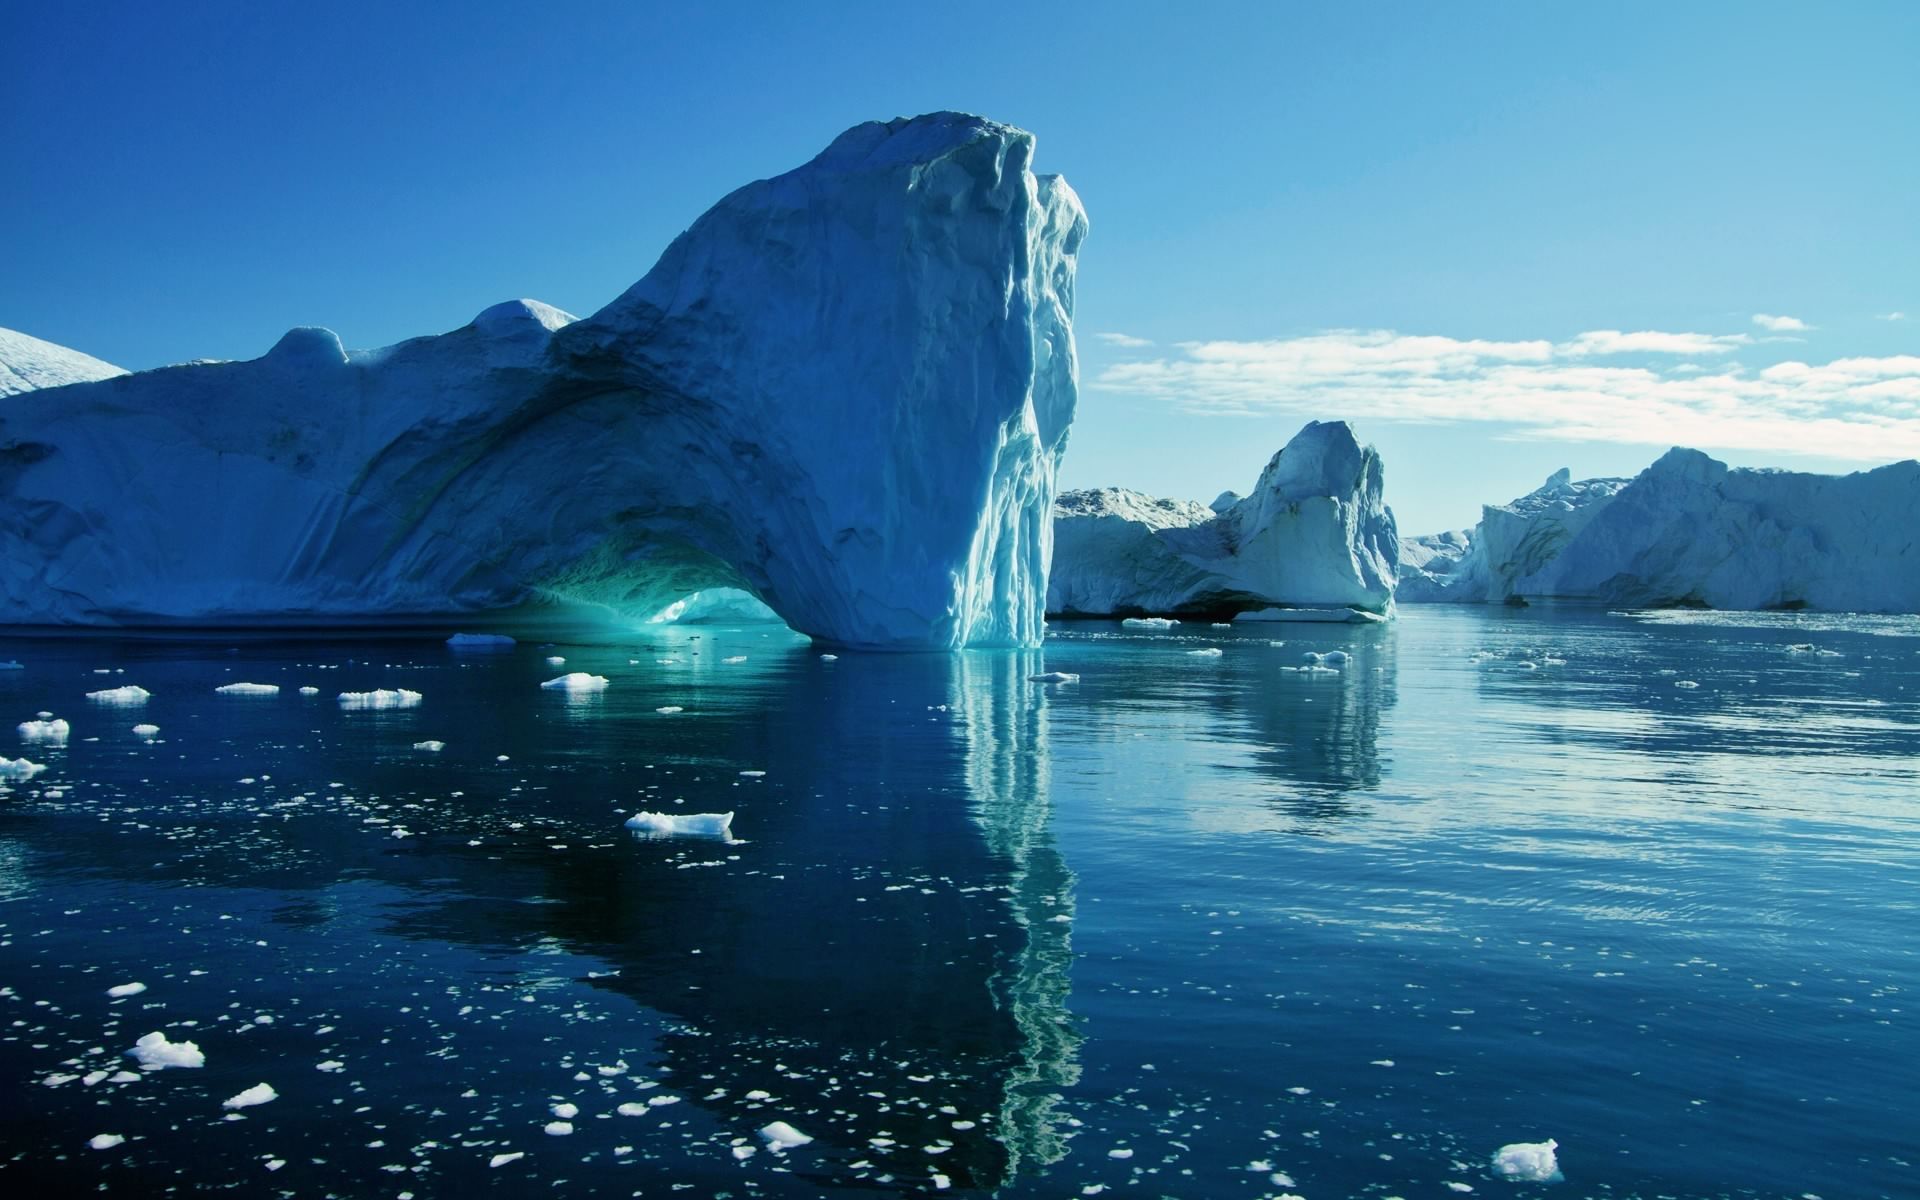 According to data collected by NASA, Antarctica has been losing more than a hundred cubic kilometers (24 cubic miles) of ice each year since 2002 and if all this ice is melts, it would raise the global sea level by about 60 meters or 197 feet. The disintegration of ice shelf, which is another cause of melting of glaciers, was caught by NASA satellites in 2010 and showed how it took just three weeks to crumble a 12,000-year old ice shelf.